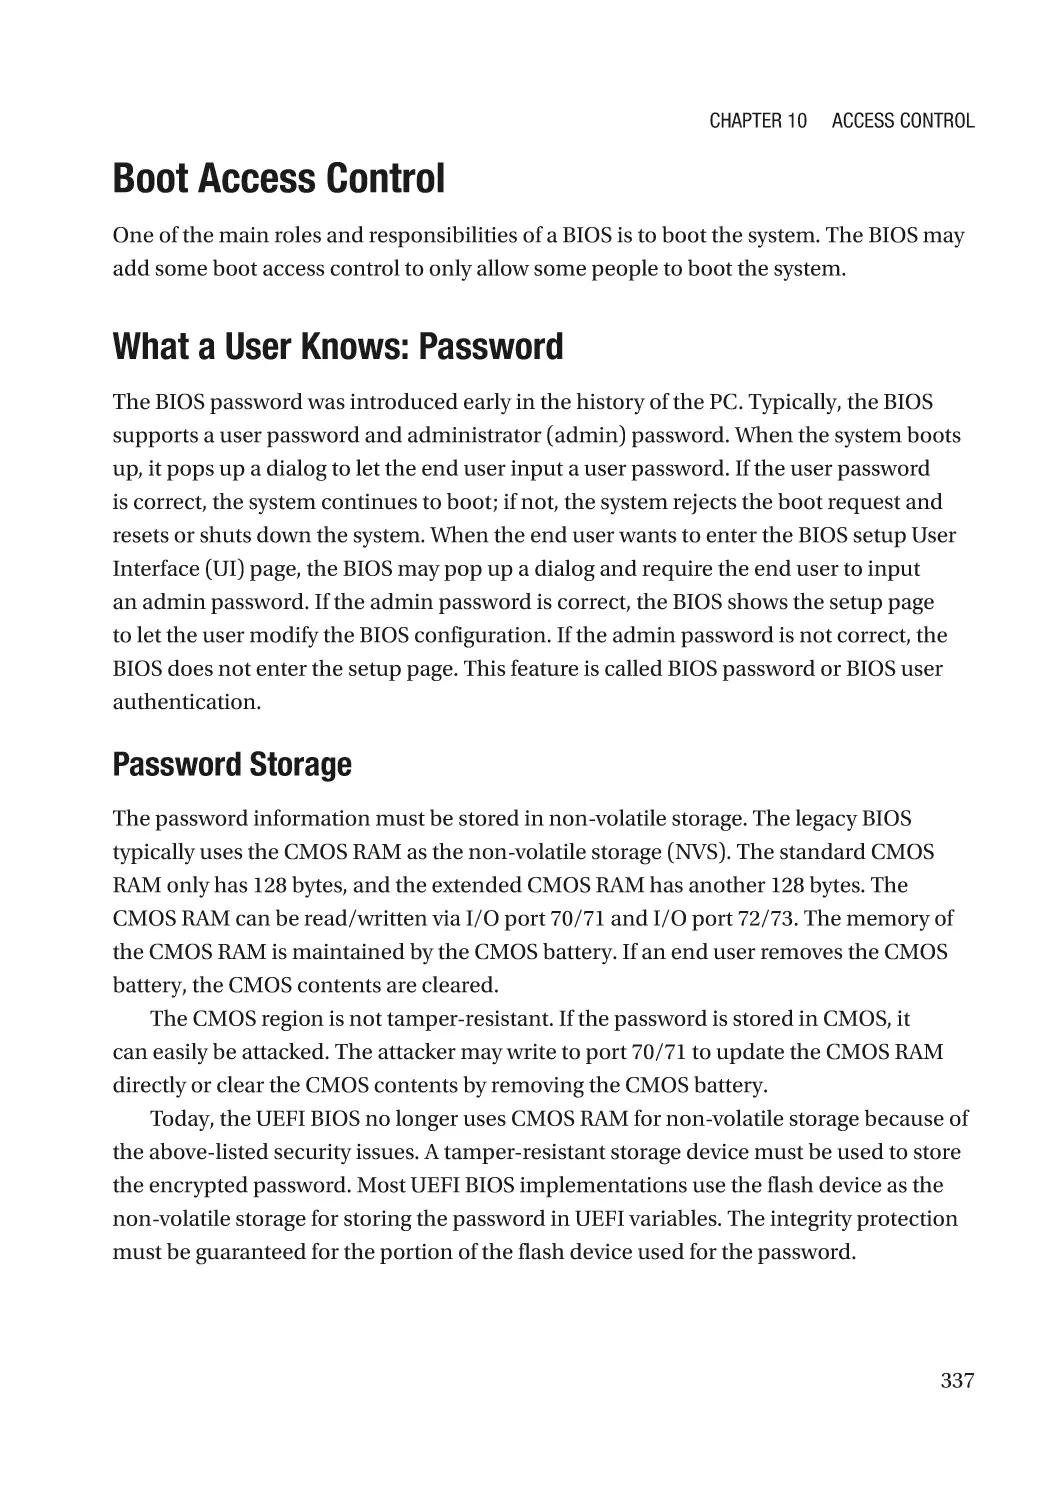 Boot Access Control
What a User Knows
Password Storage